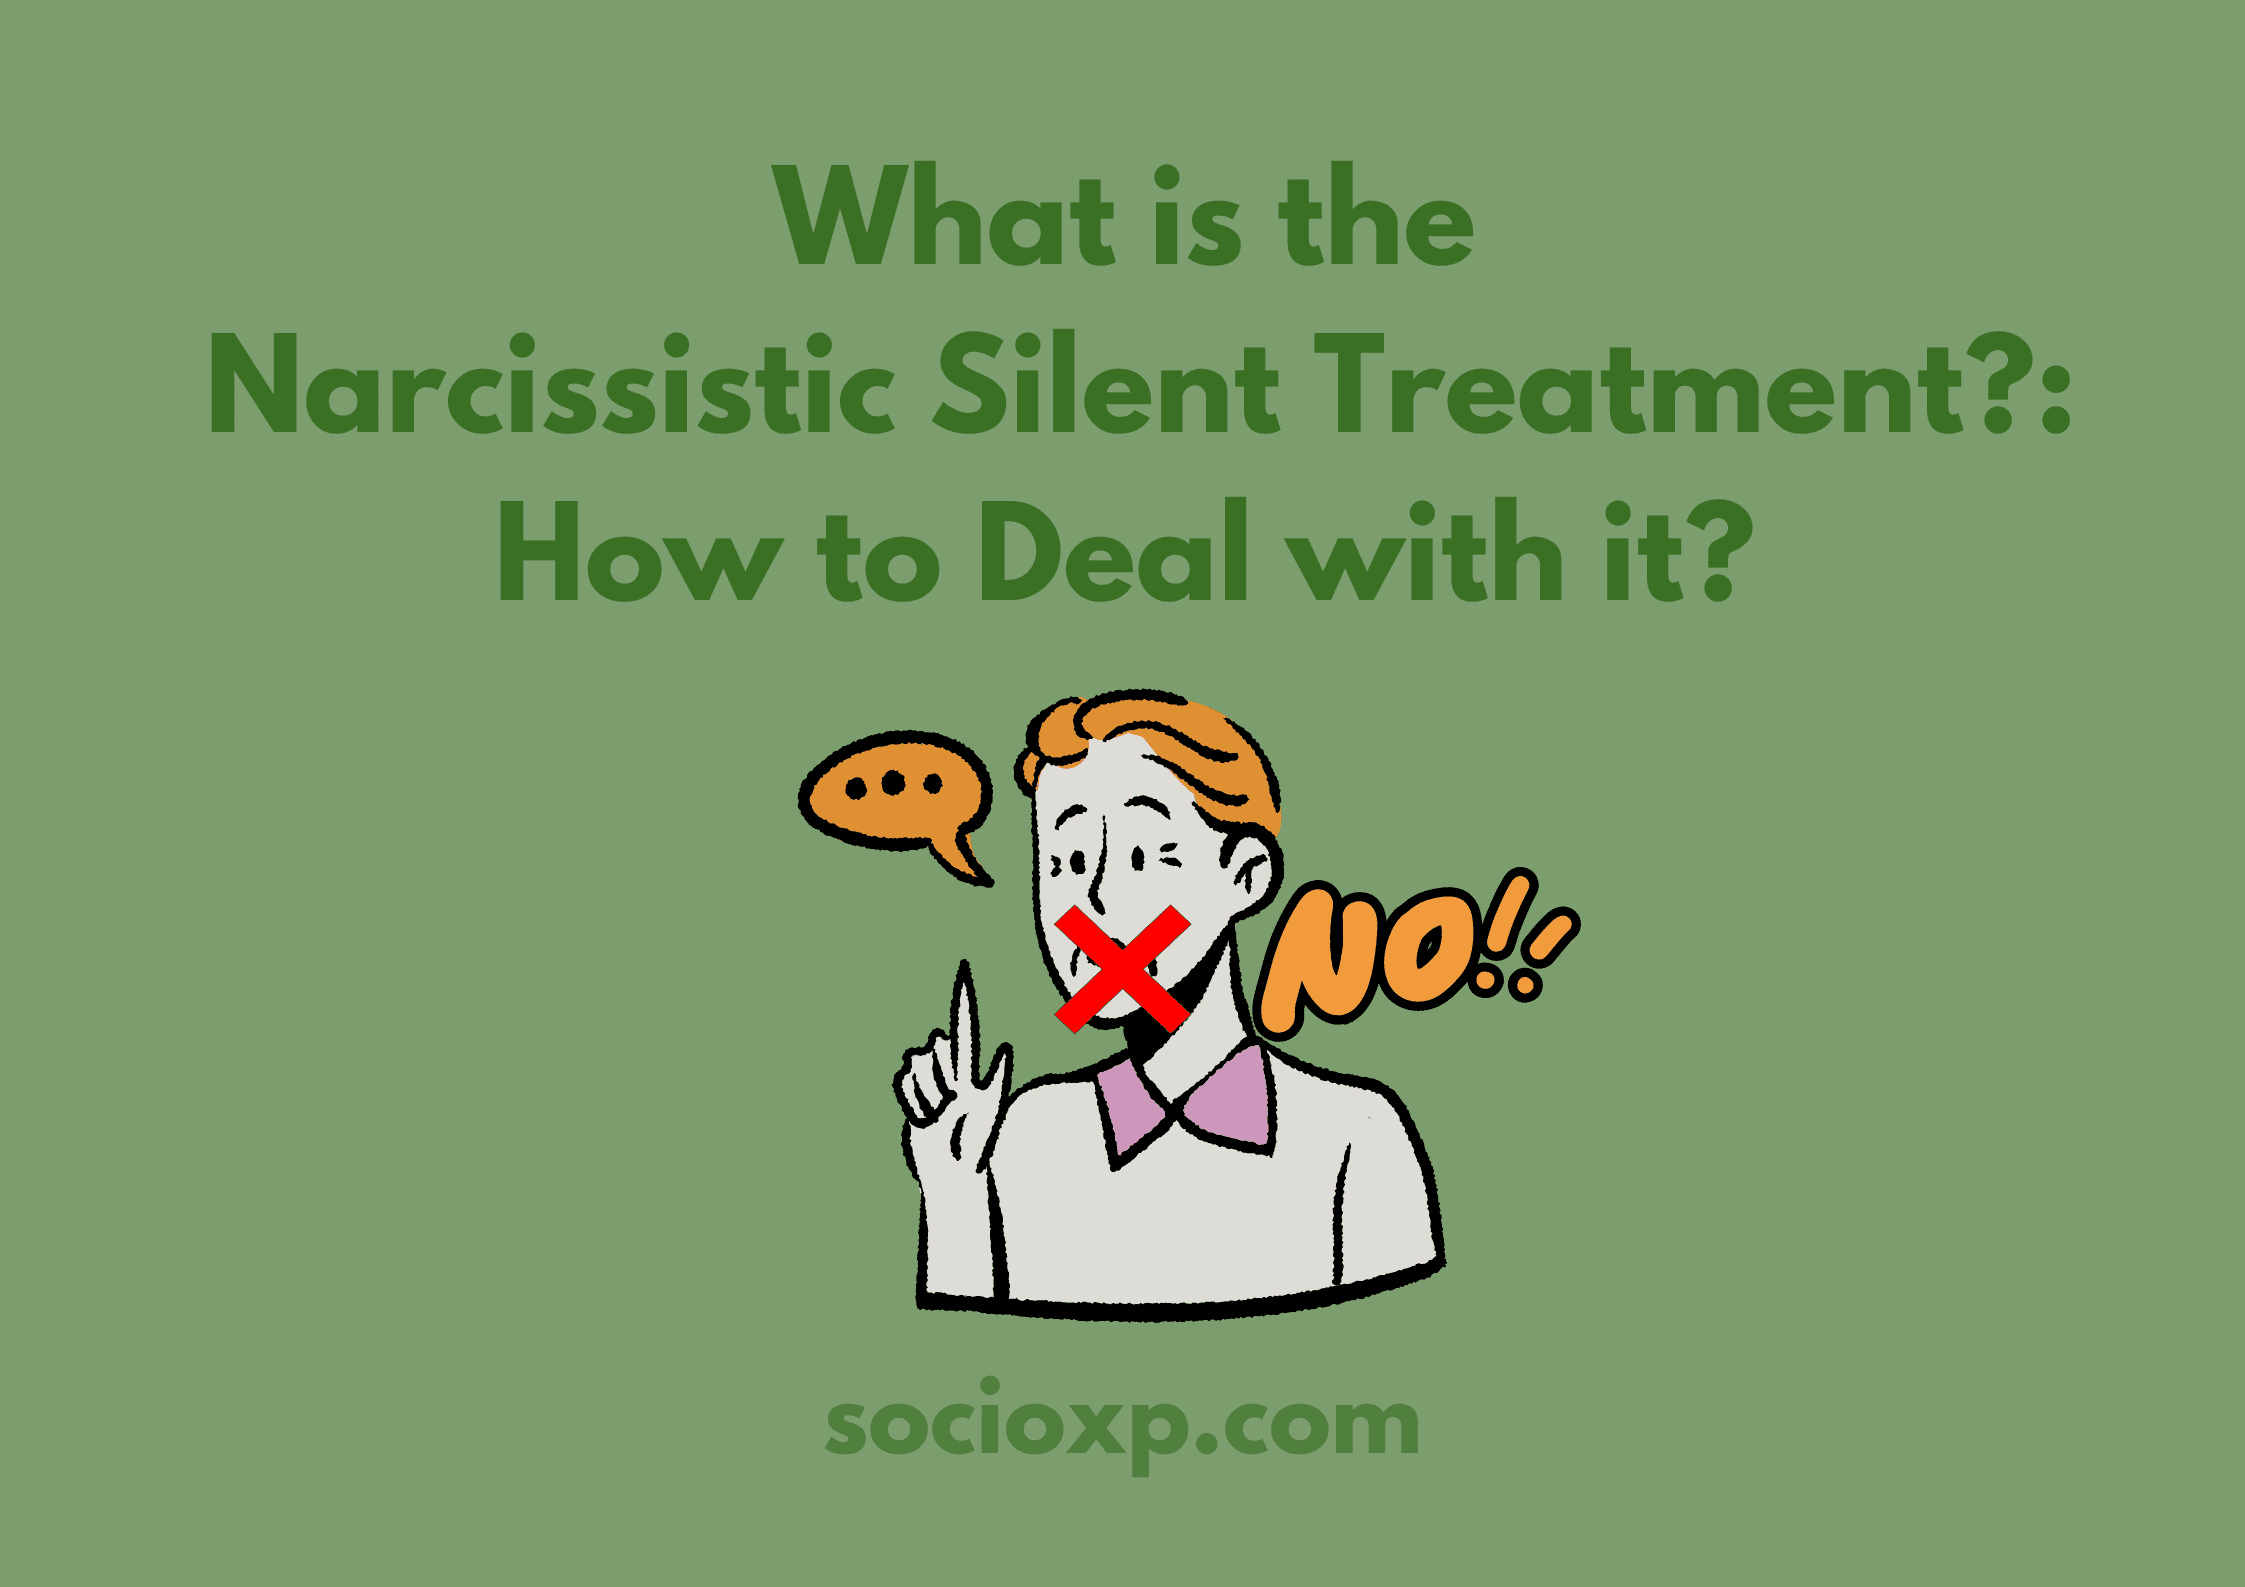 What is the Narcissistic Silent Treatment?: How to Deal with it?